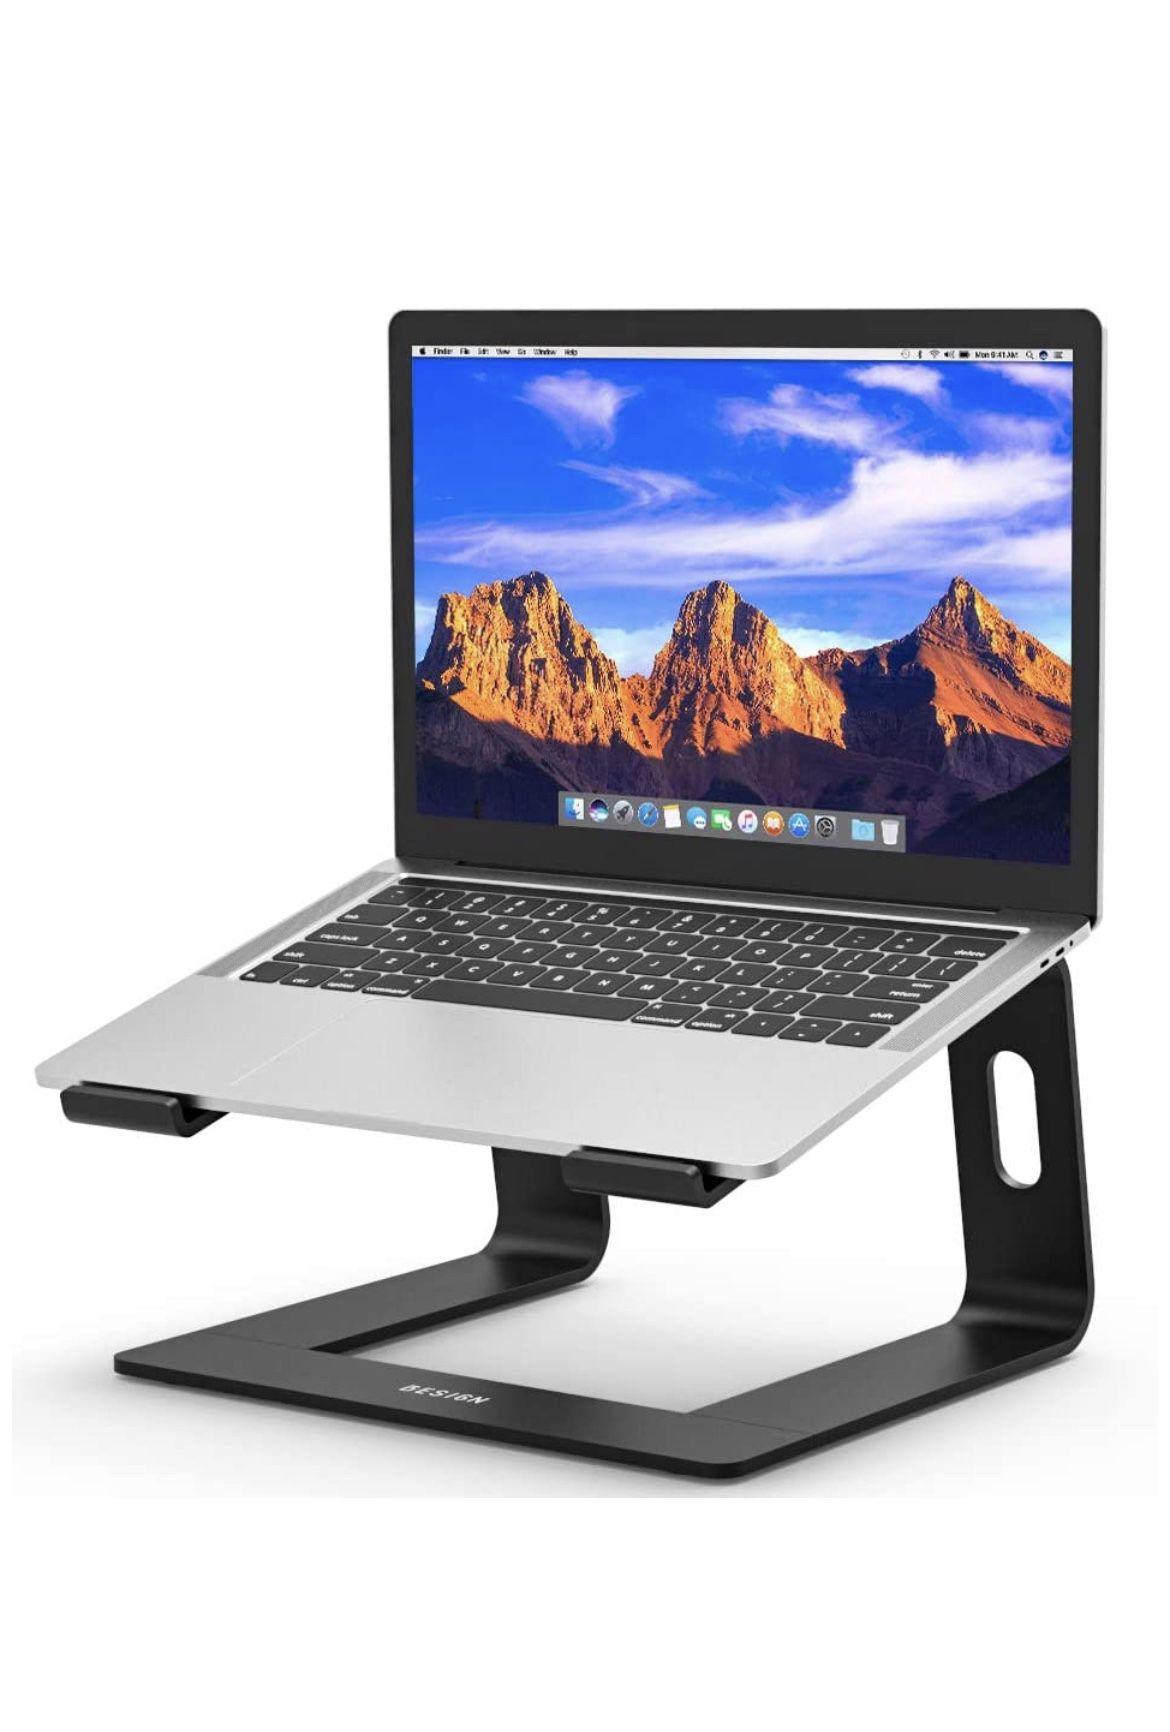 Besign LS03 Aluminum Laptop Stand, Ergonomic Detachable Computer Stand, Riser Holder Notebook Stand Compatible with Air, Pro, Dell, HP, Lenovo More 10